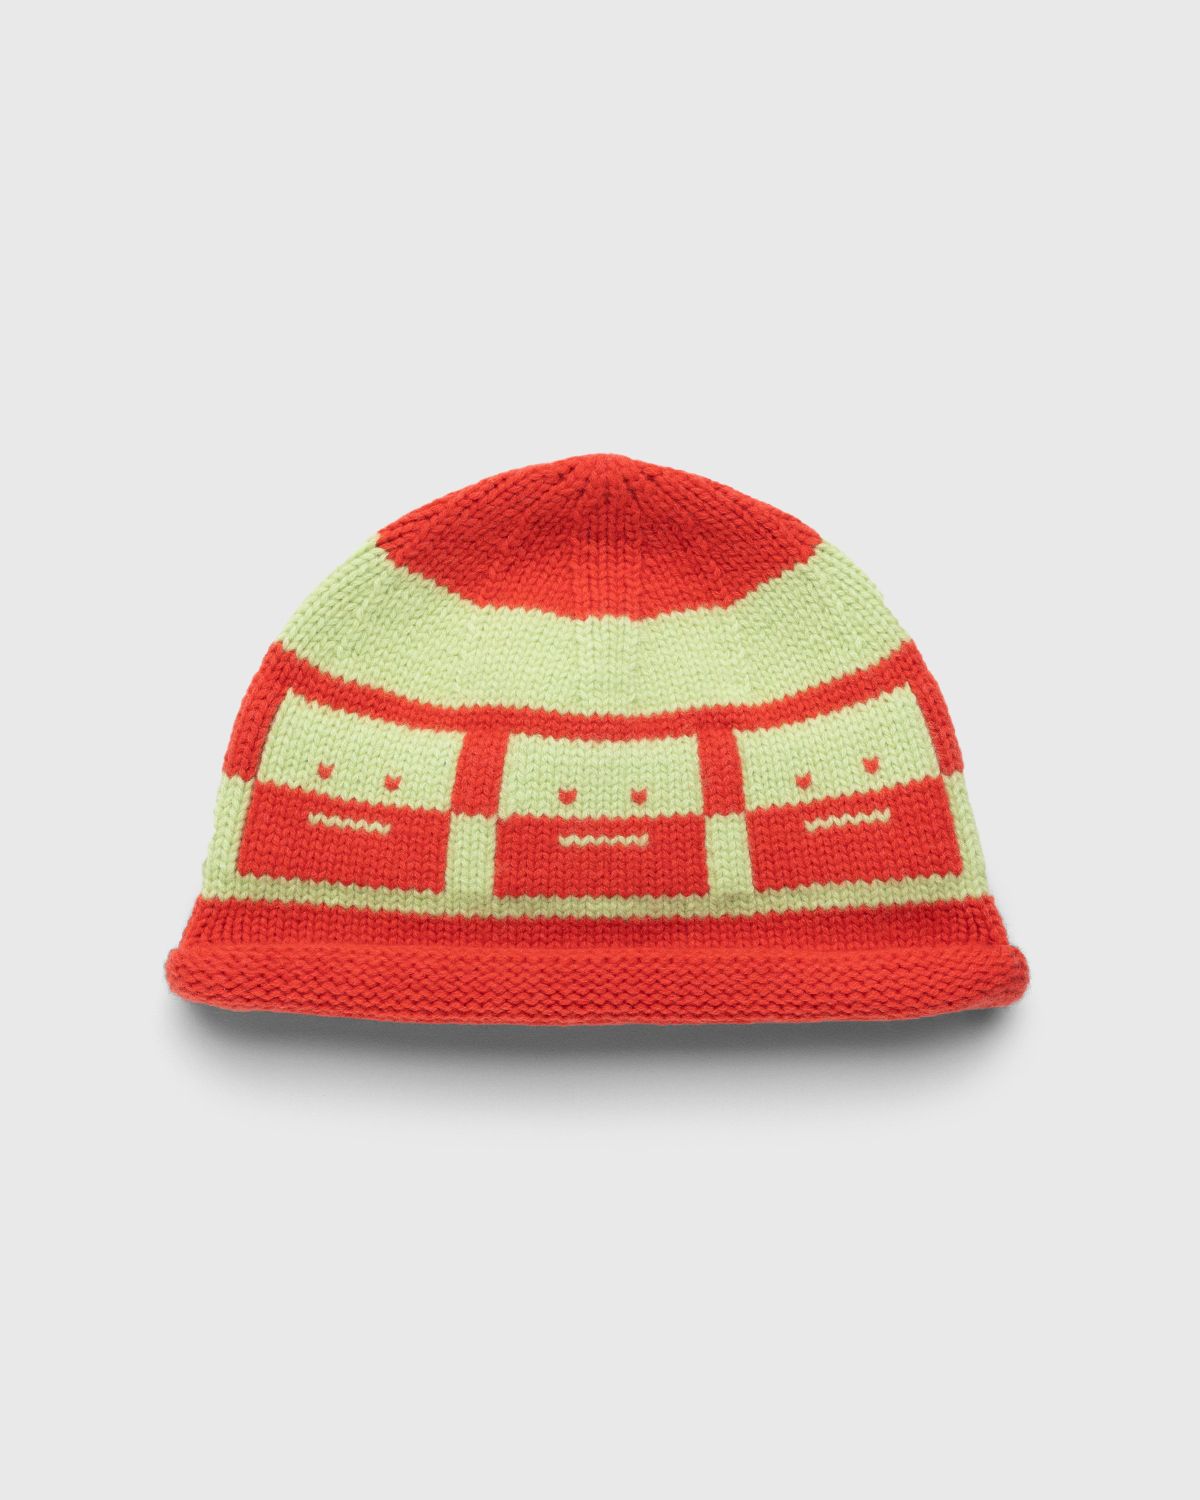 Acne Studios – Checkerboard Face Beanie Red - Beanies - Multi - Image 1